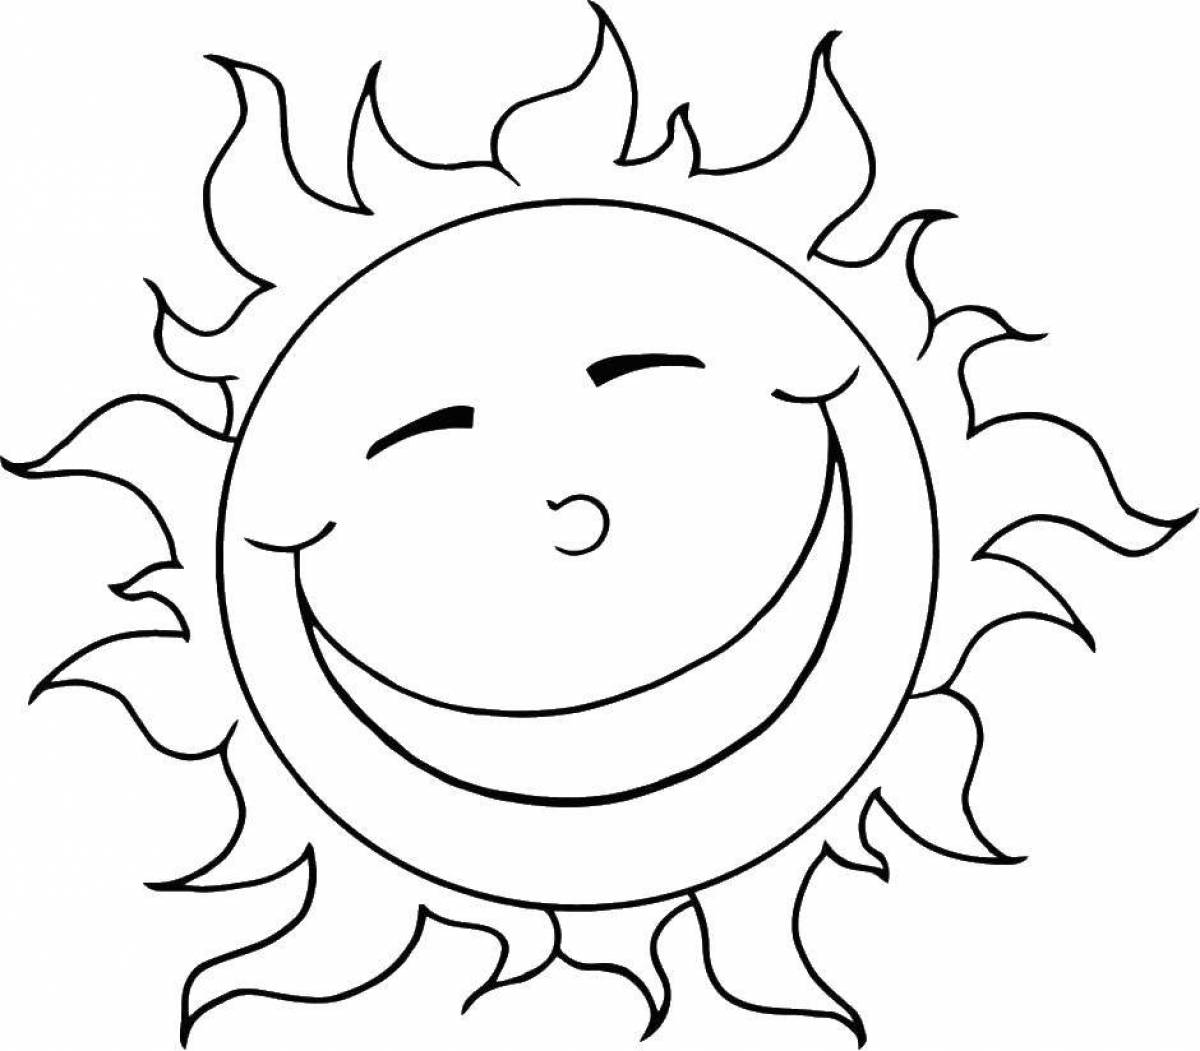 Sun with a big smile